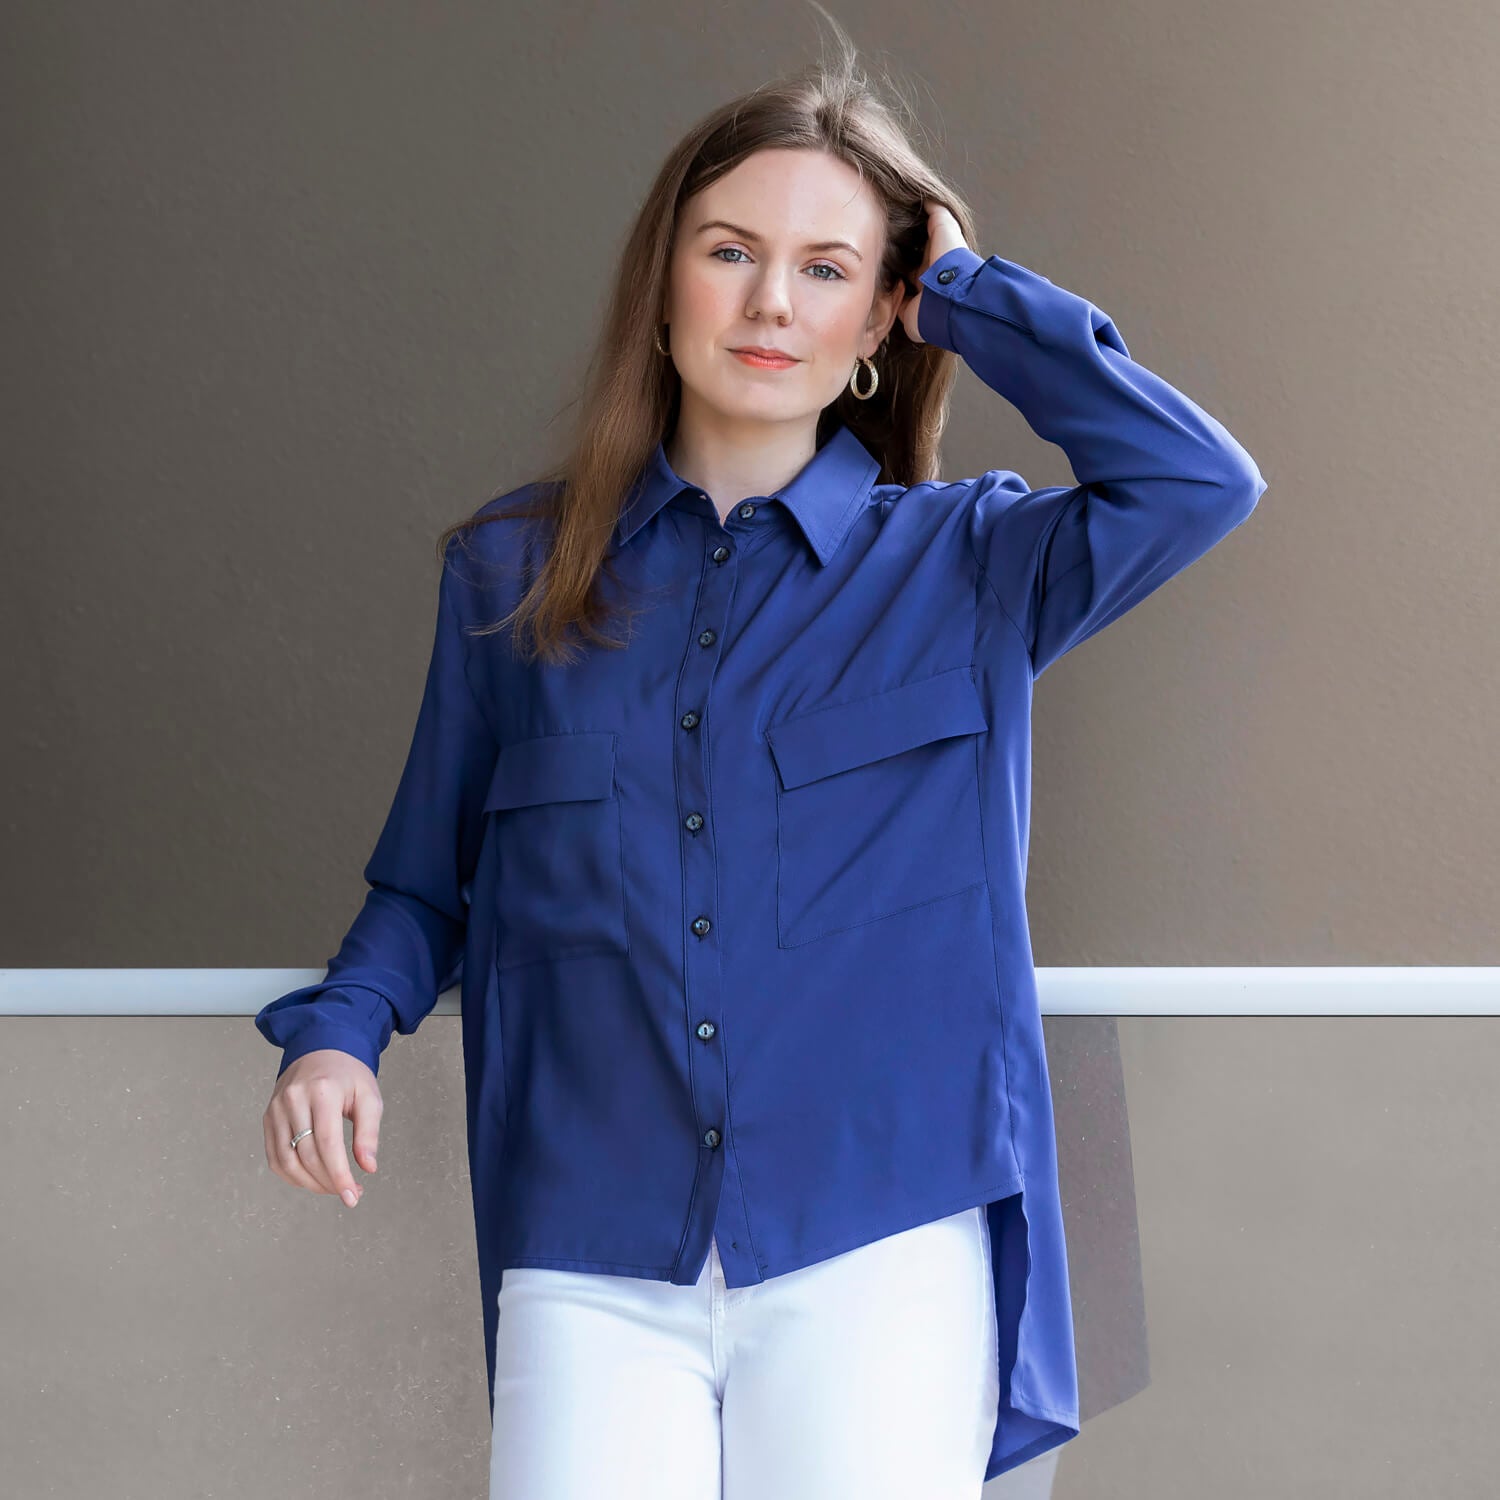 blueberry long sleeve shirt by seahorse silks with white jeans